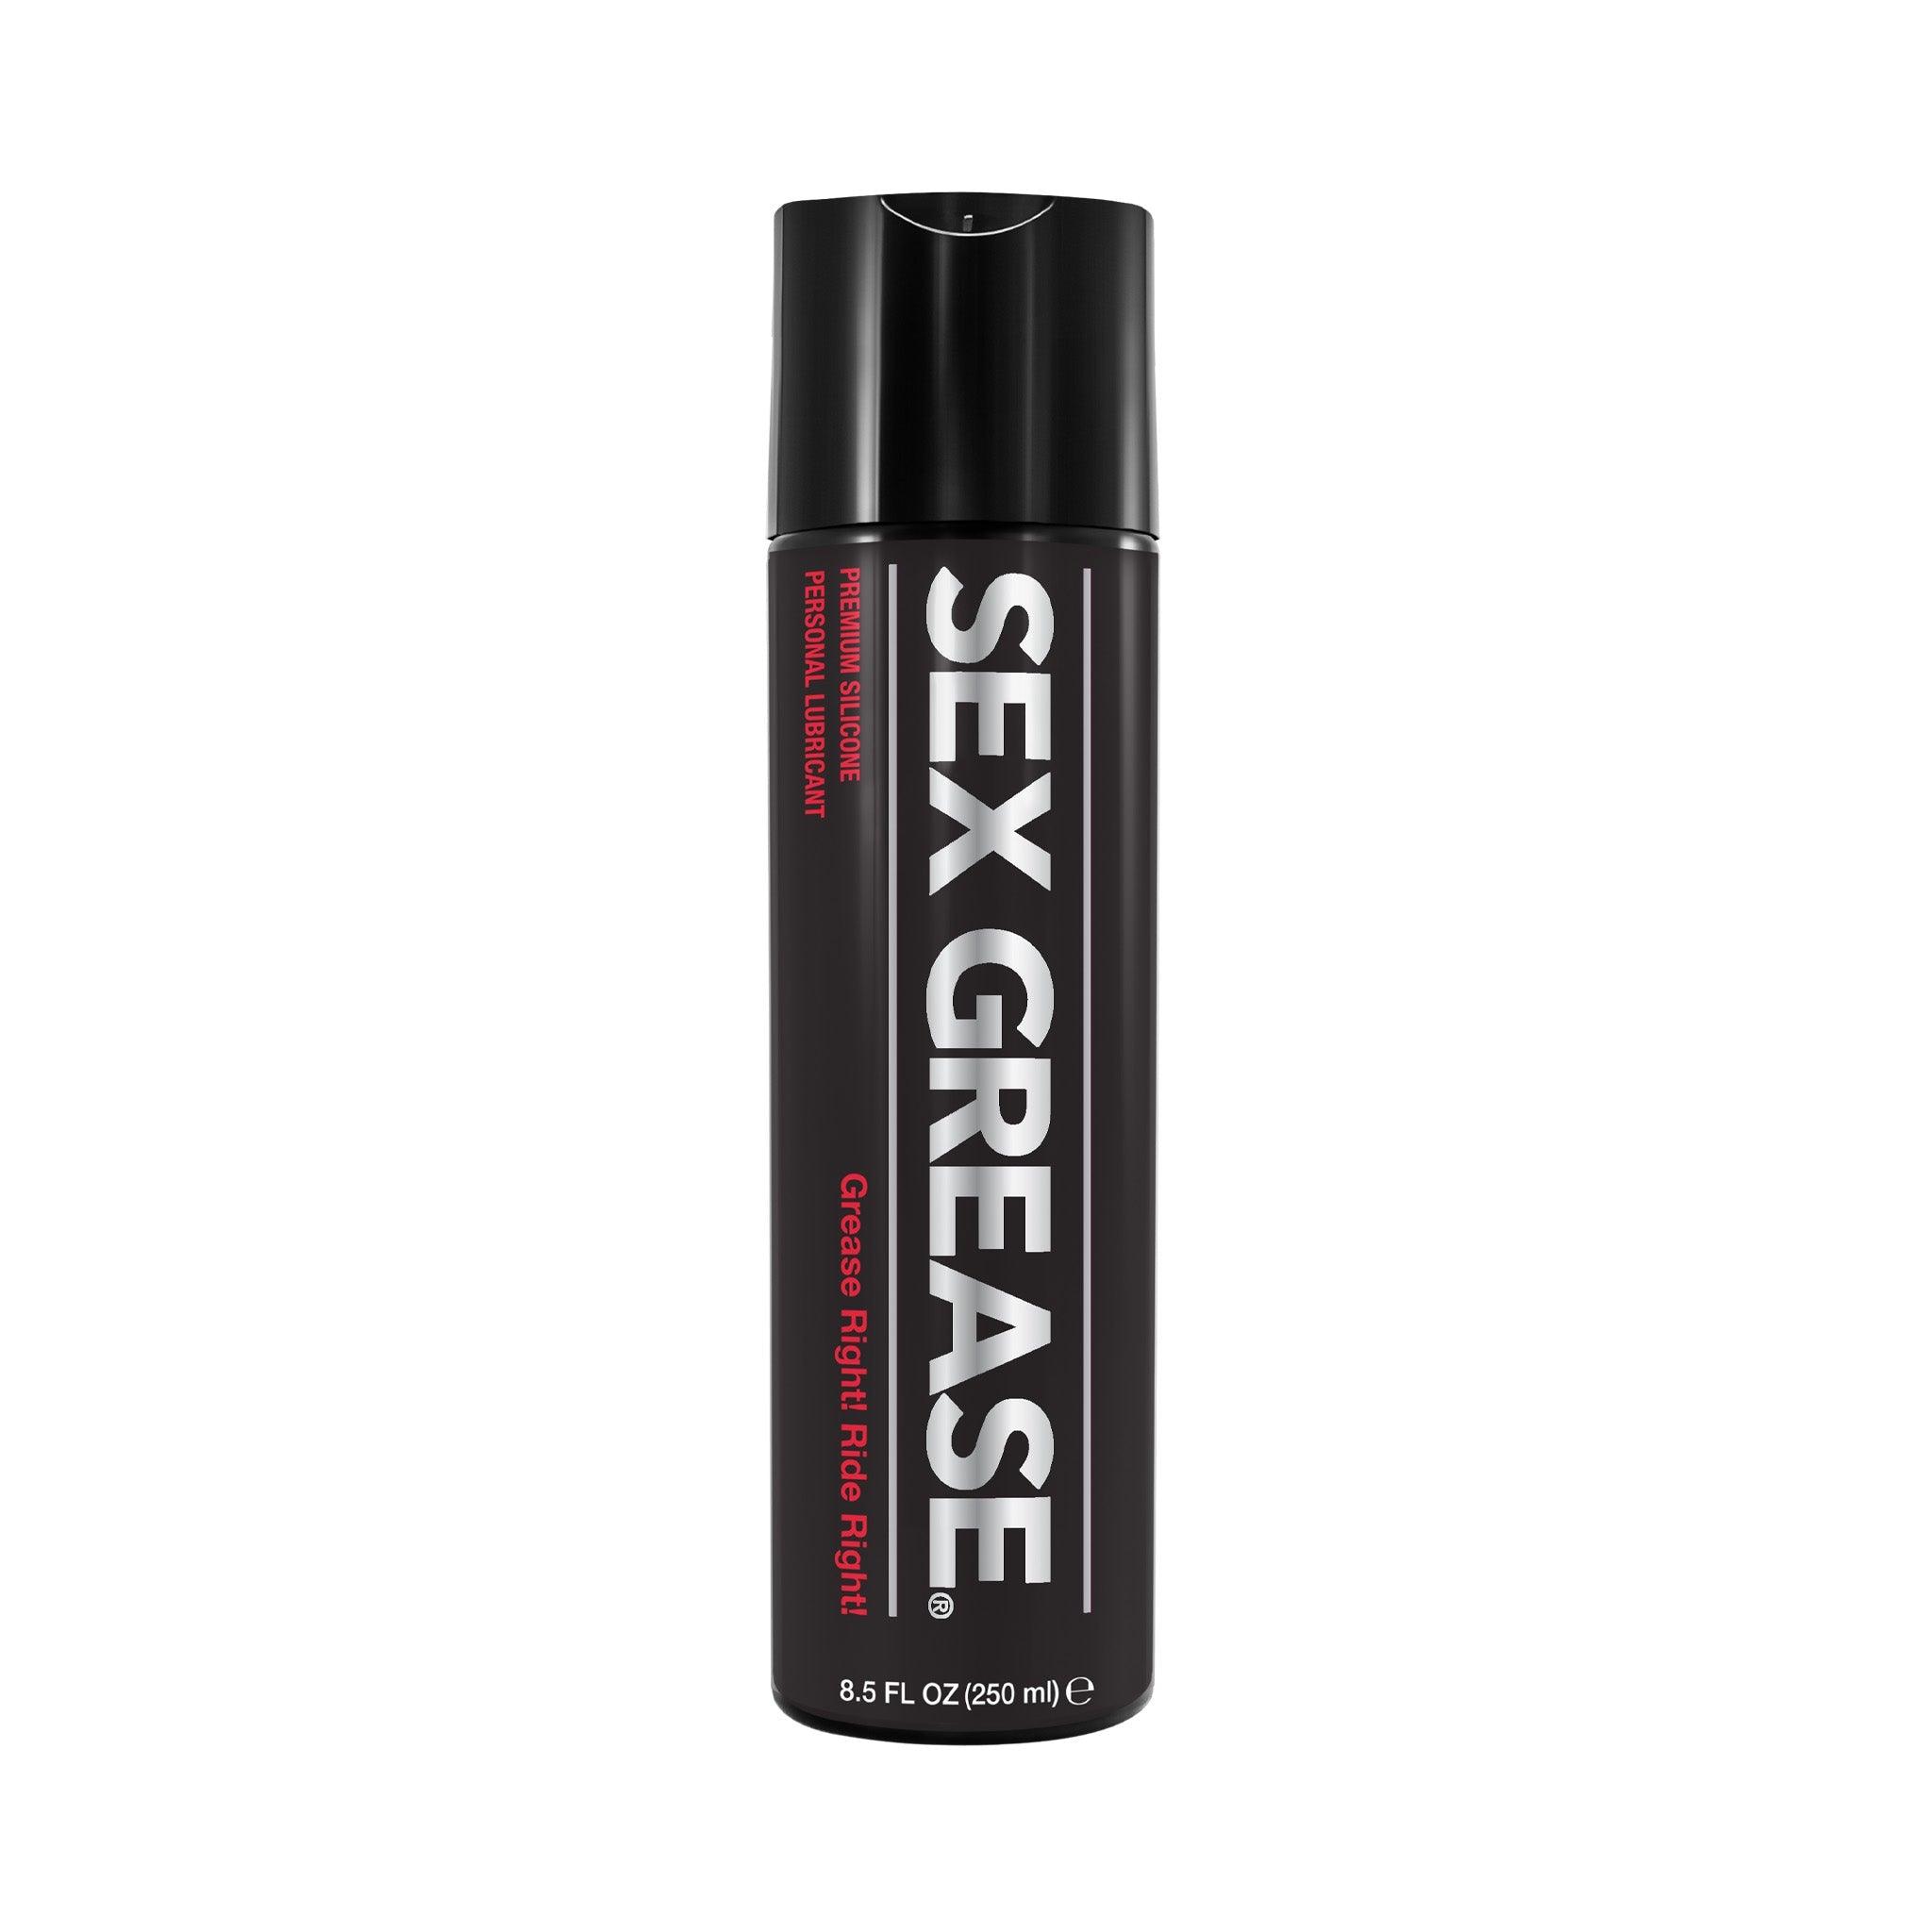 Sex Grease Premium Silicone Based Personal Lubricant - CheapLubes.com